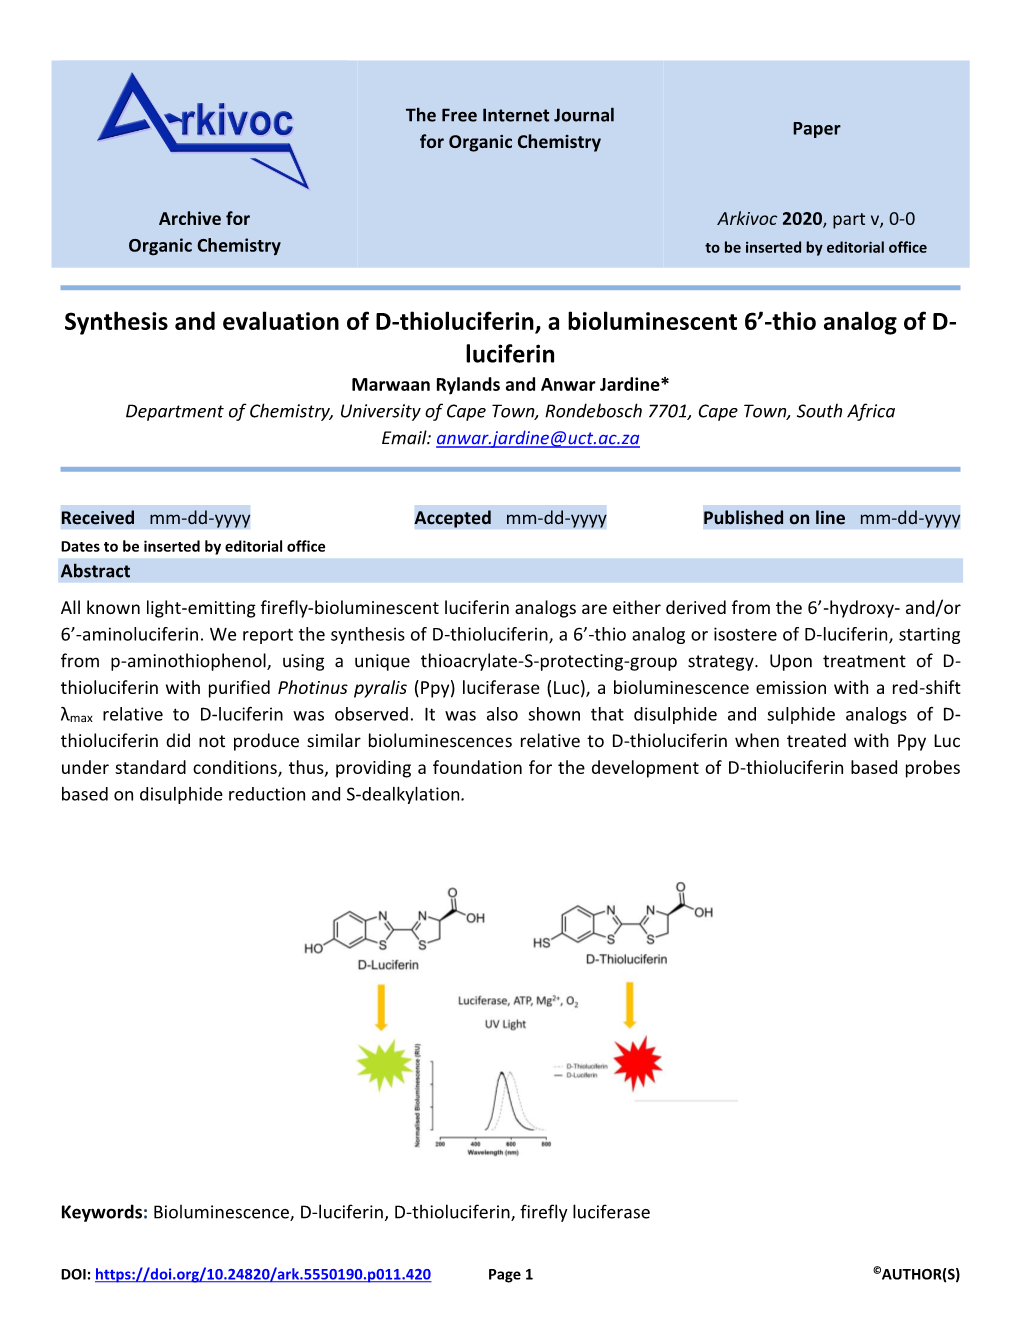 Synthesis and Evaluation of D-Thioluciferin, a Bioluminescent 6'-Thio Analog of D- Luciferin